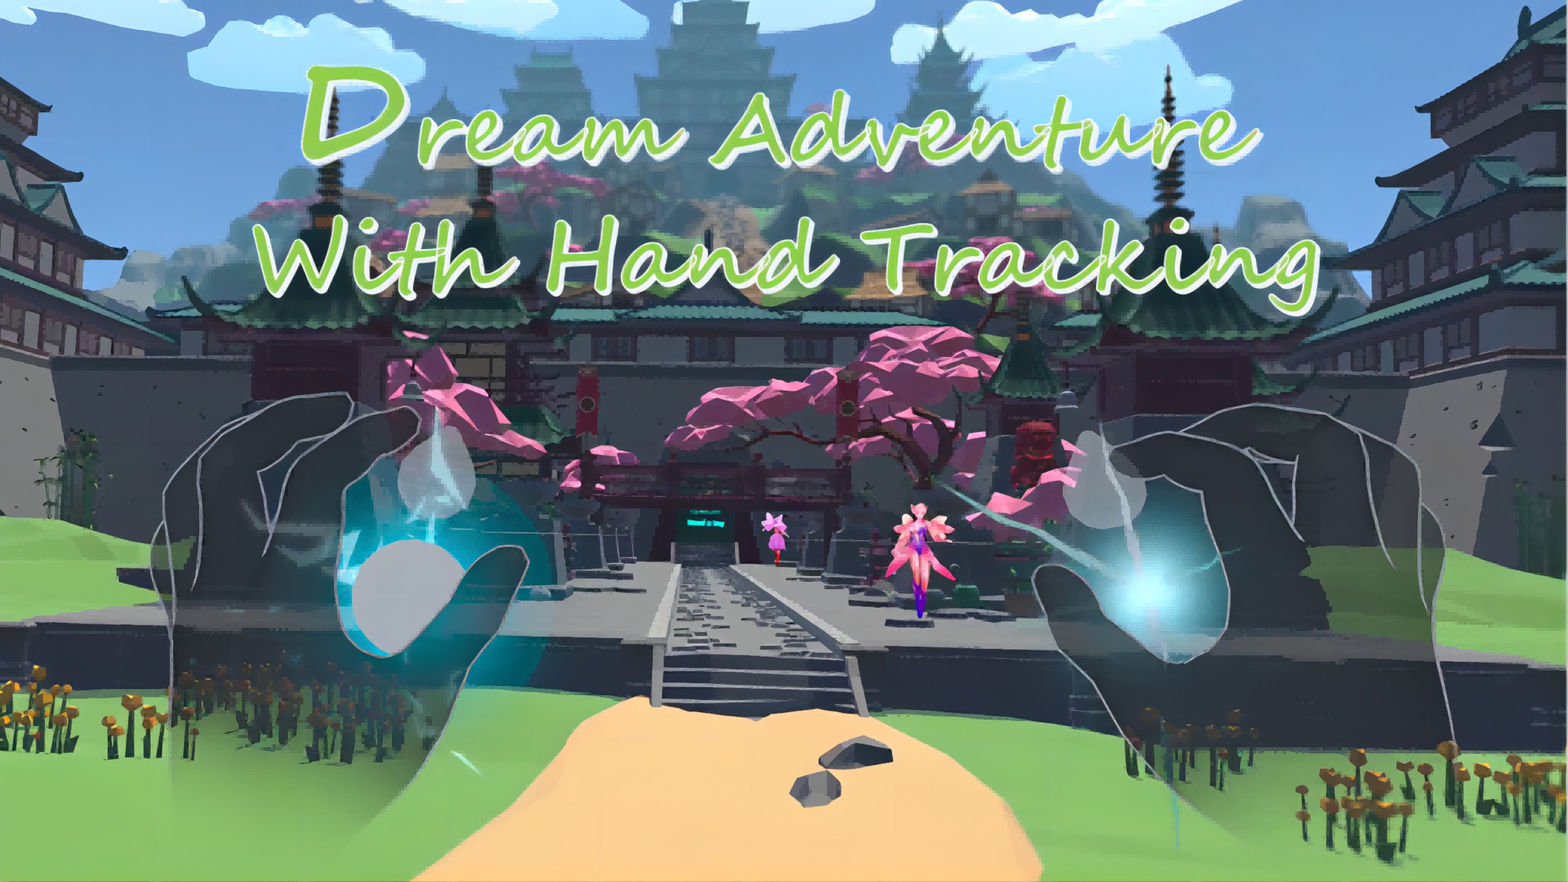 Dream Adventure With Hand Tracking